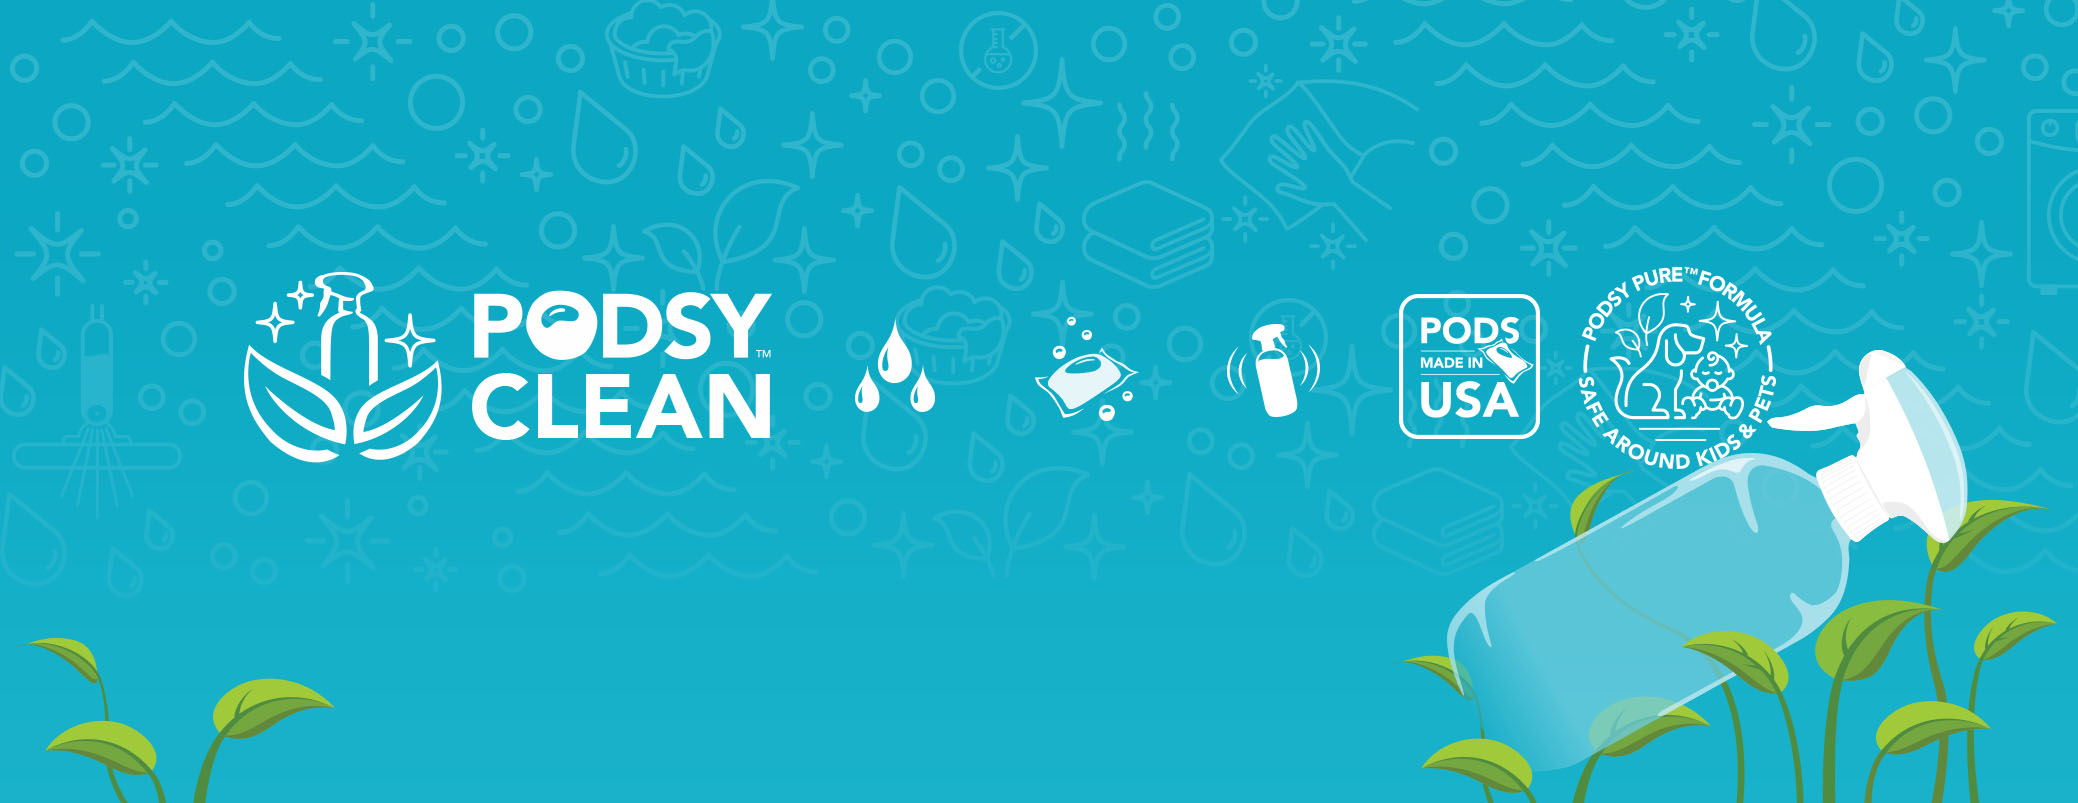 Podsy Clean - Illustration, iconogragraphy, icon library, and design system